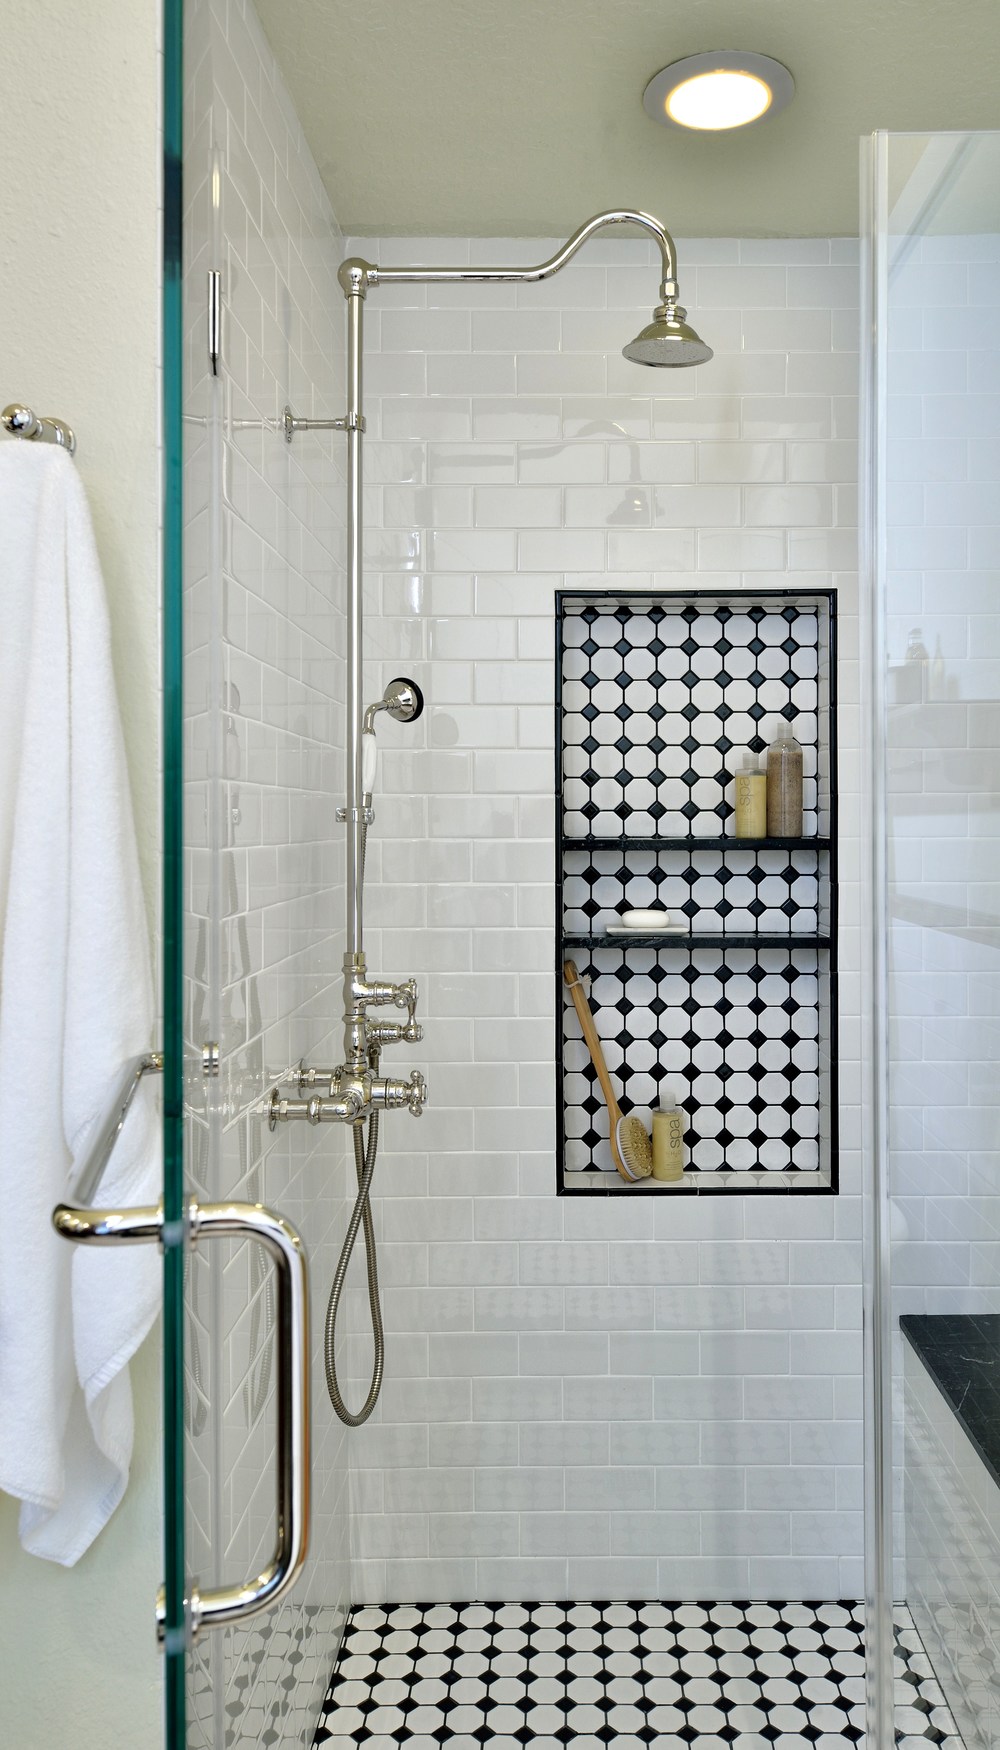 SEE THE FULL REMODEL: Before & After: This Vintage-Inspired Master Bathroom Is An Instant-Classic! | Photographer: Miro Dvorscak